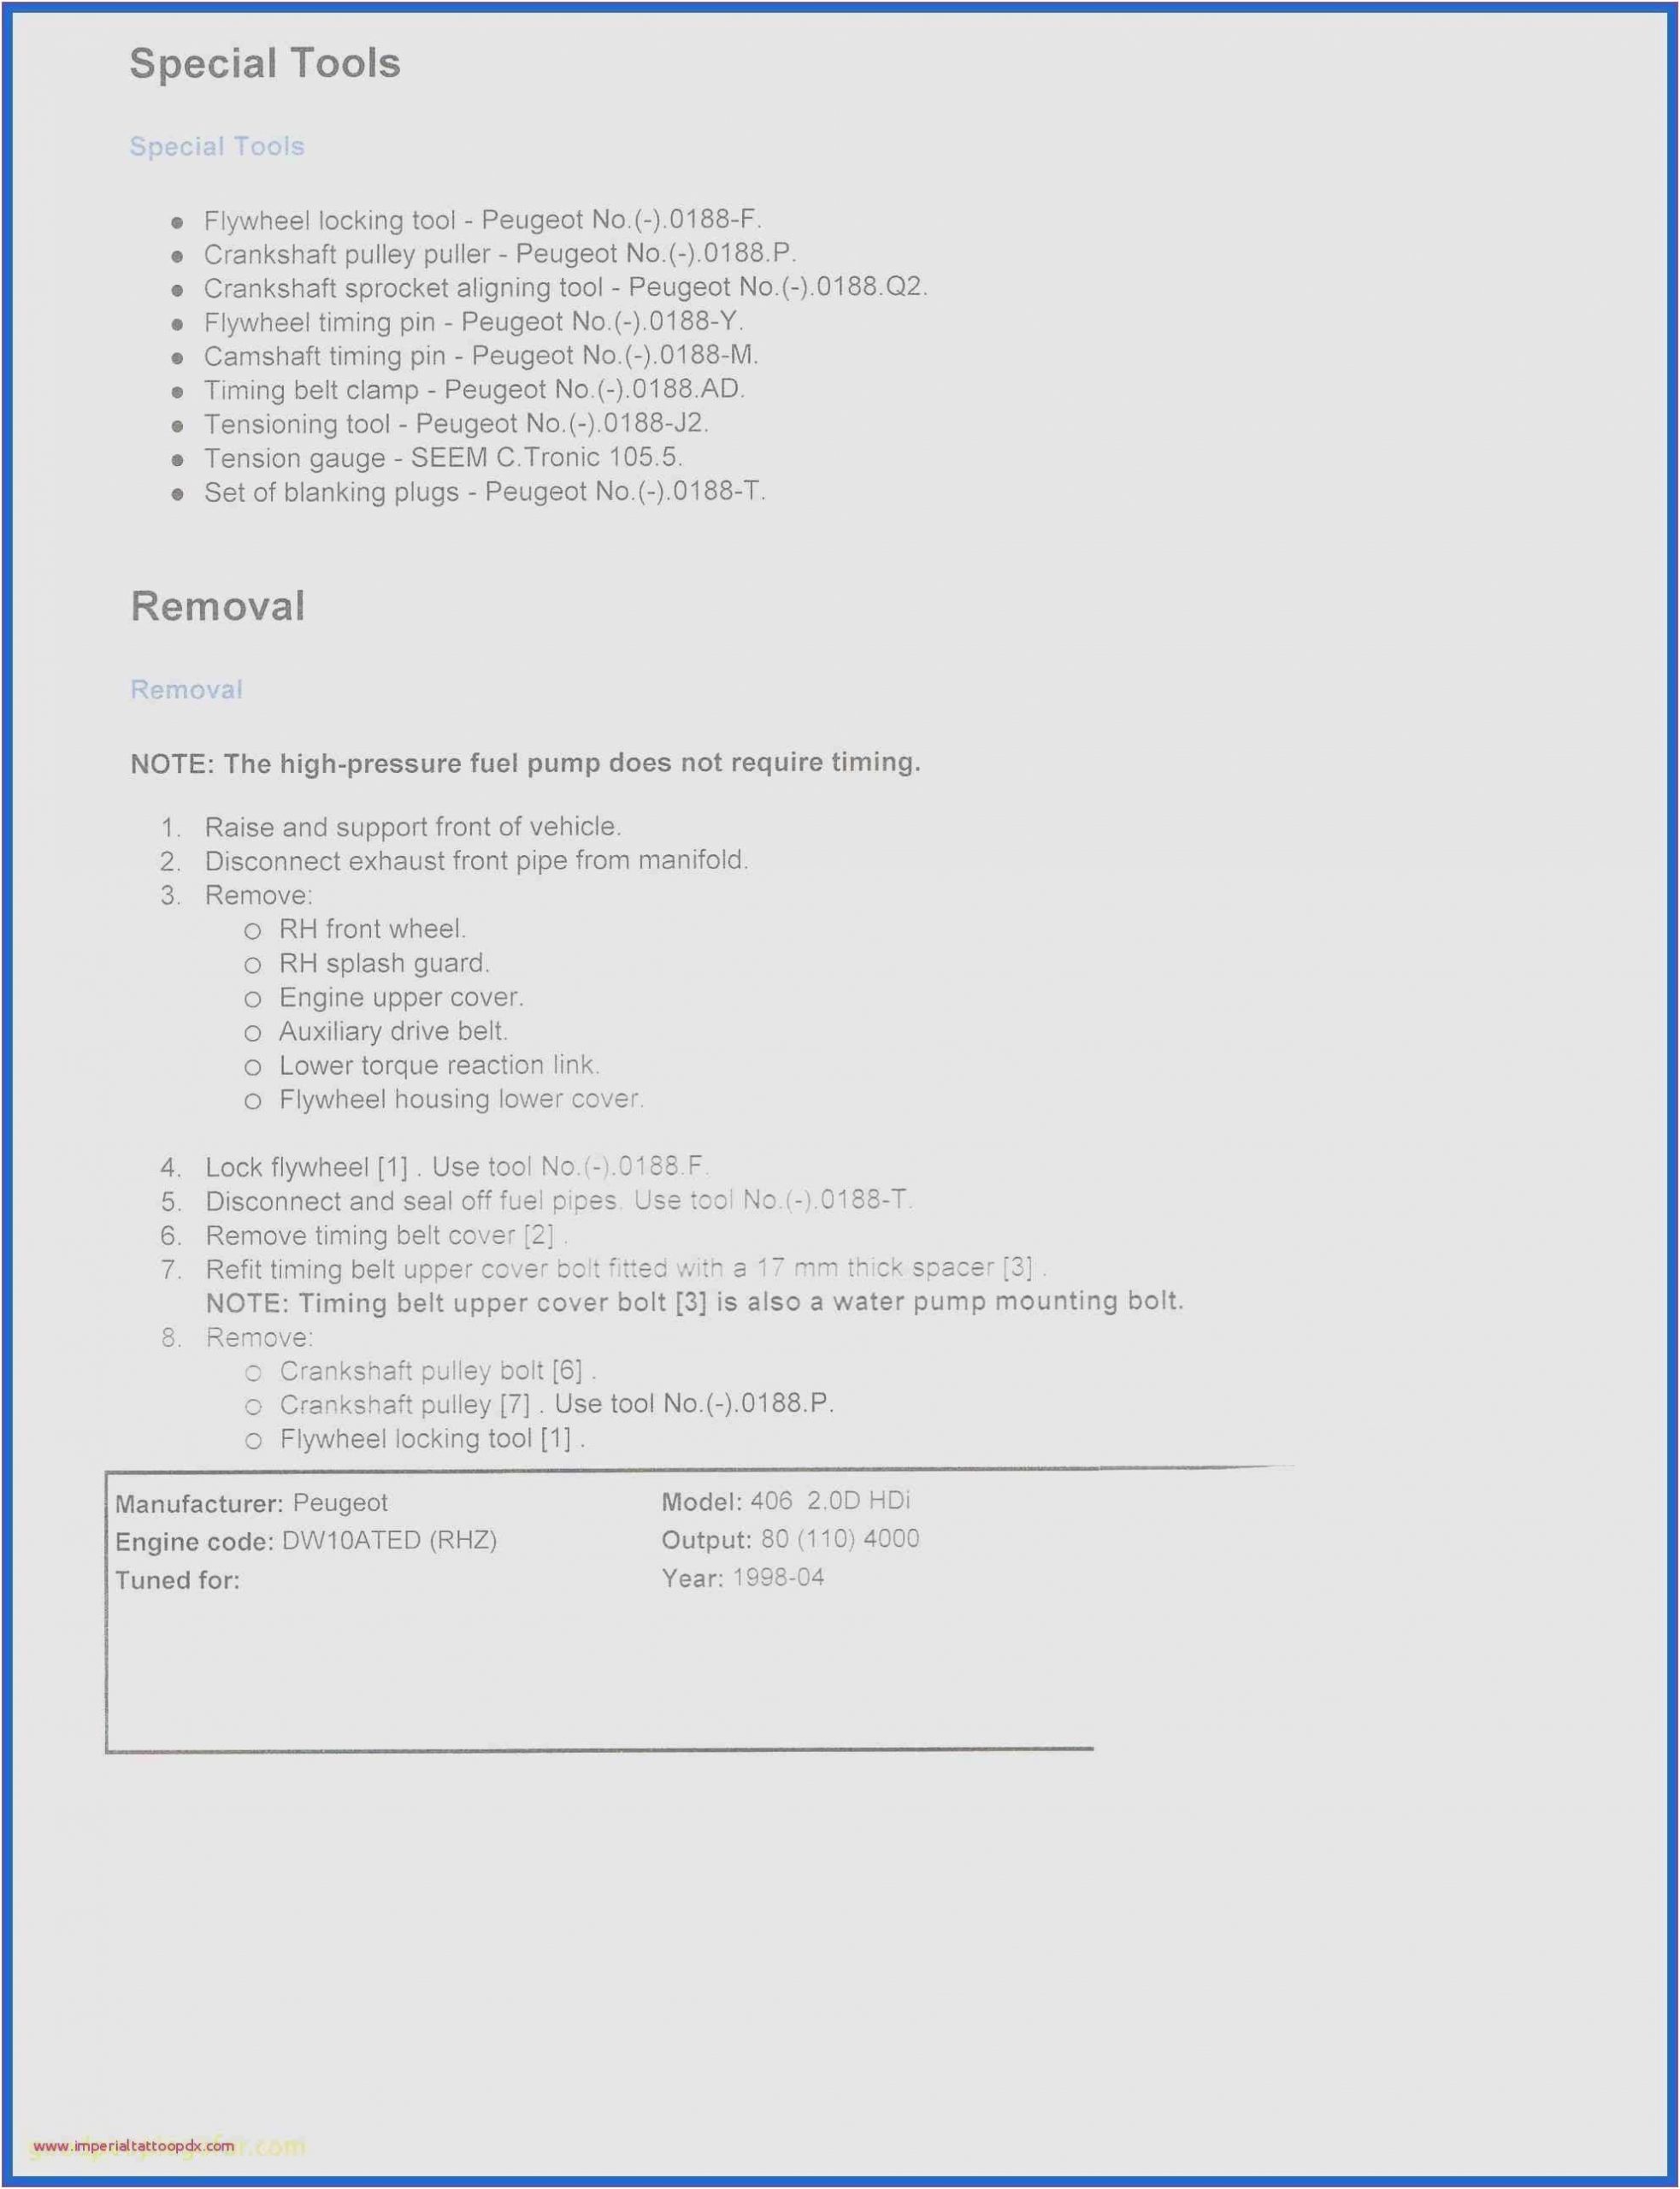 Best Resume Template for No Work Experience Free Resume Templates for College Students with No Work